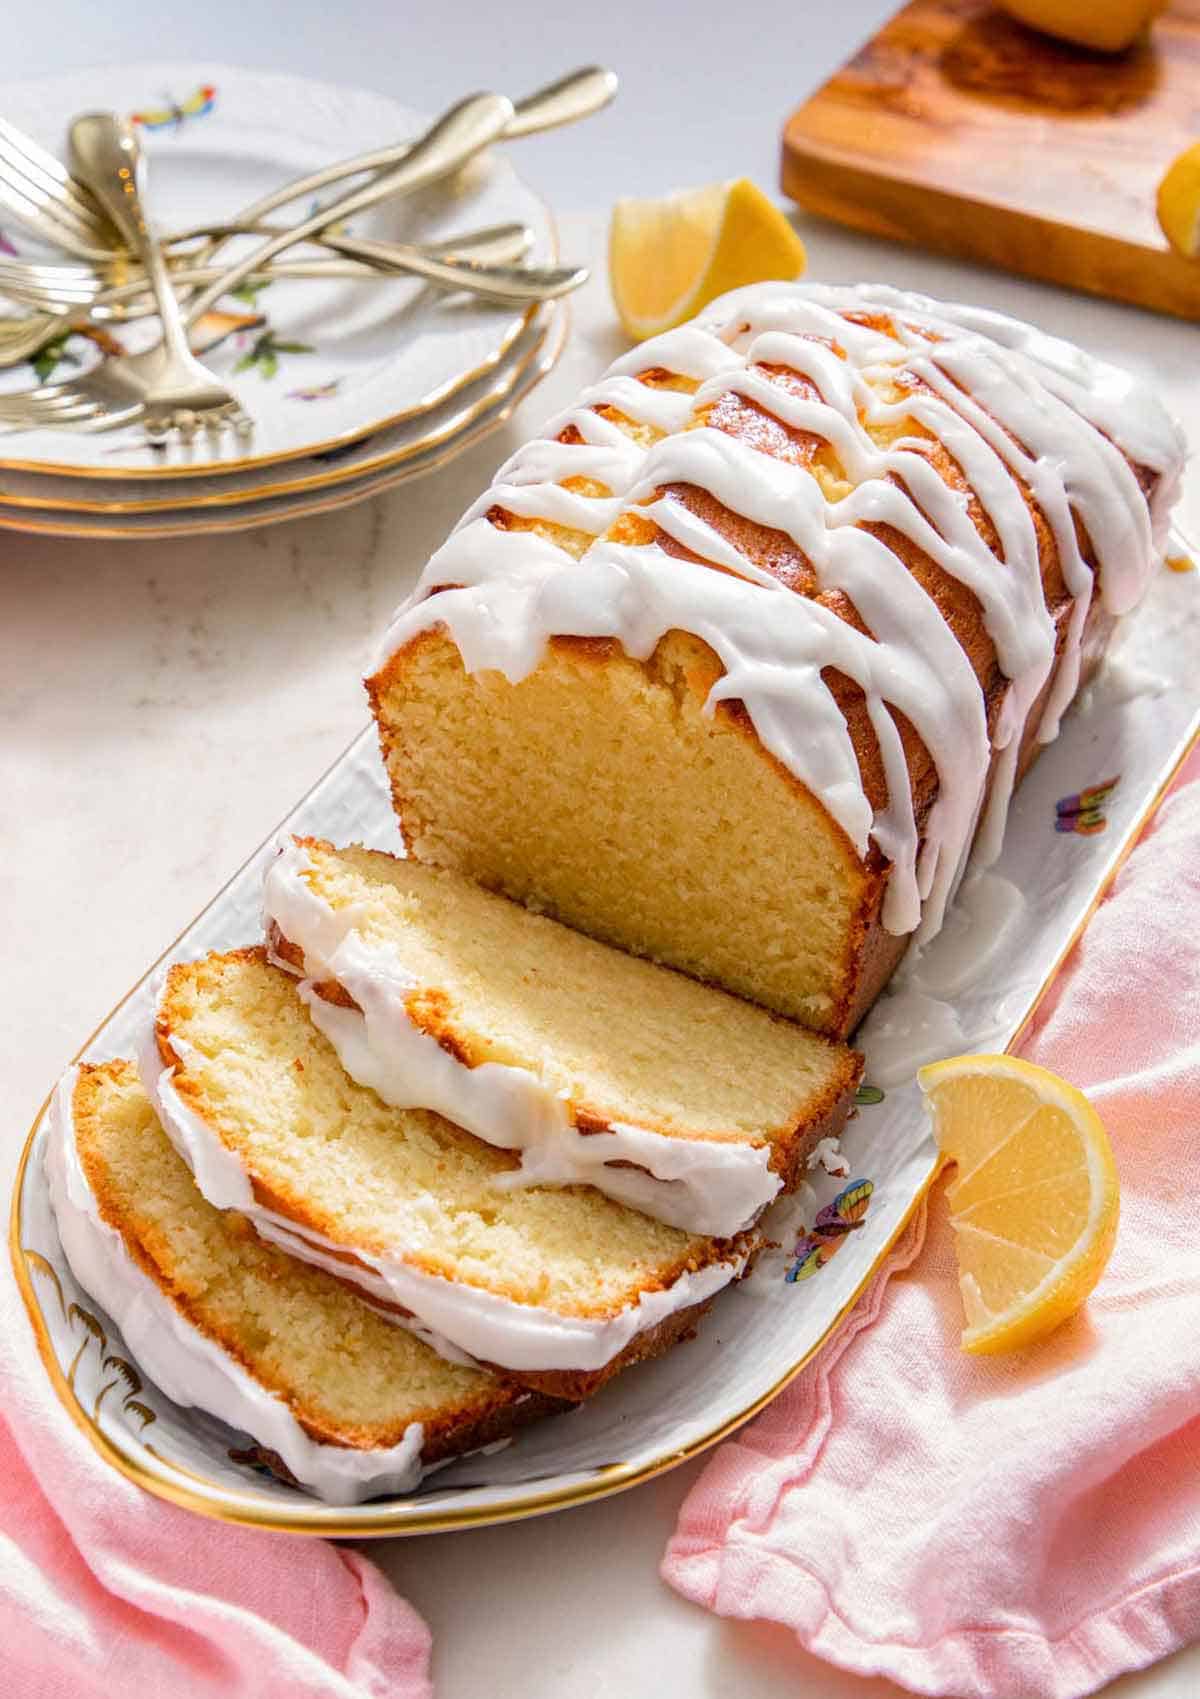 A platter with a loaf of lemon pound cake with three slices cut.